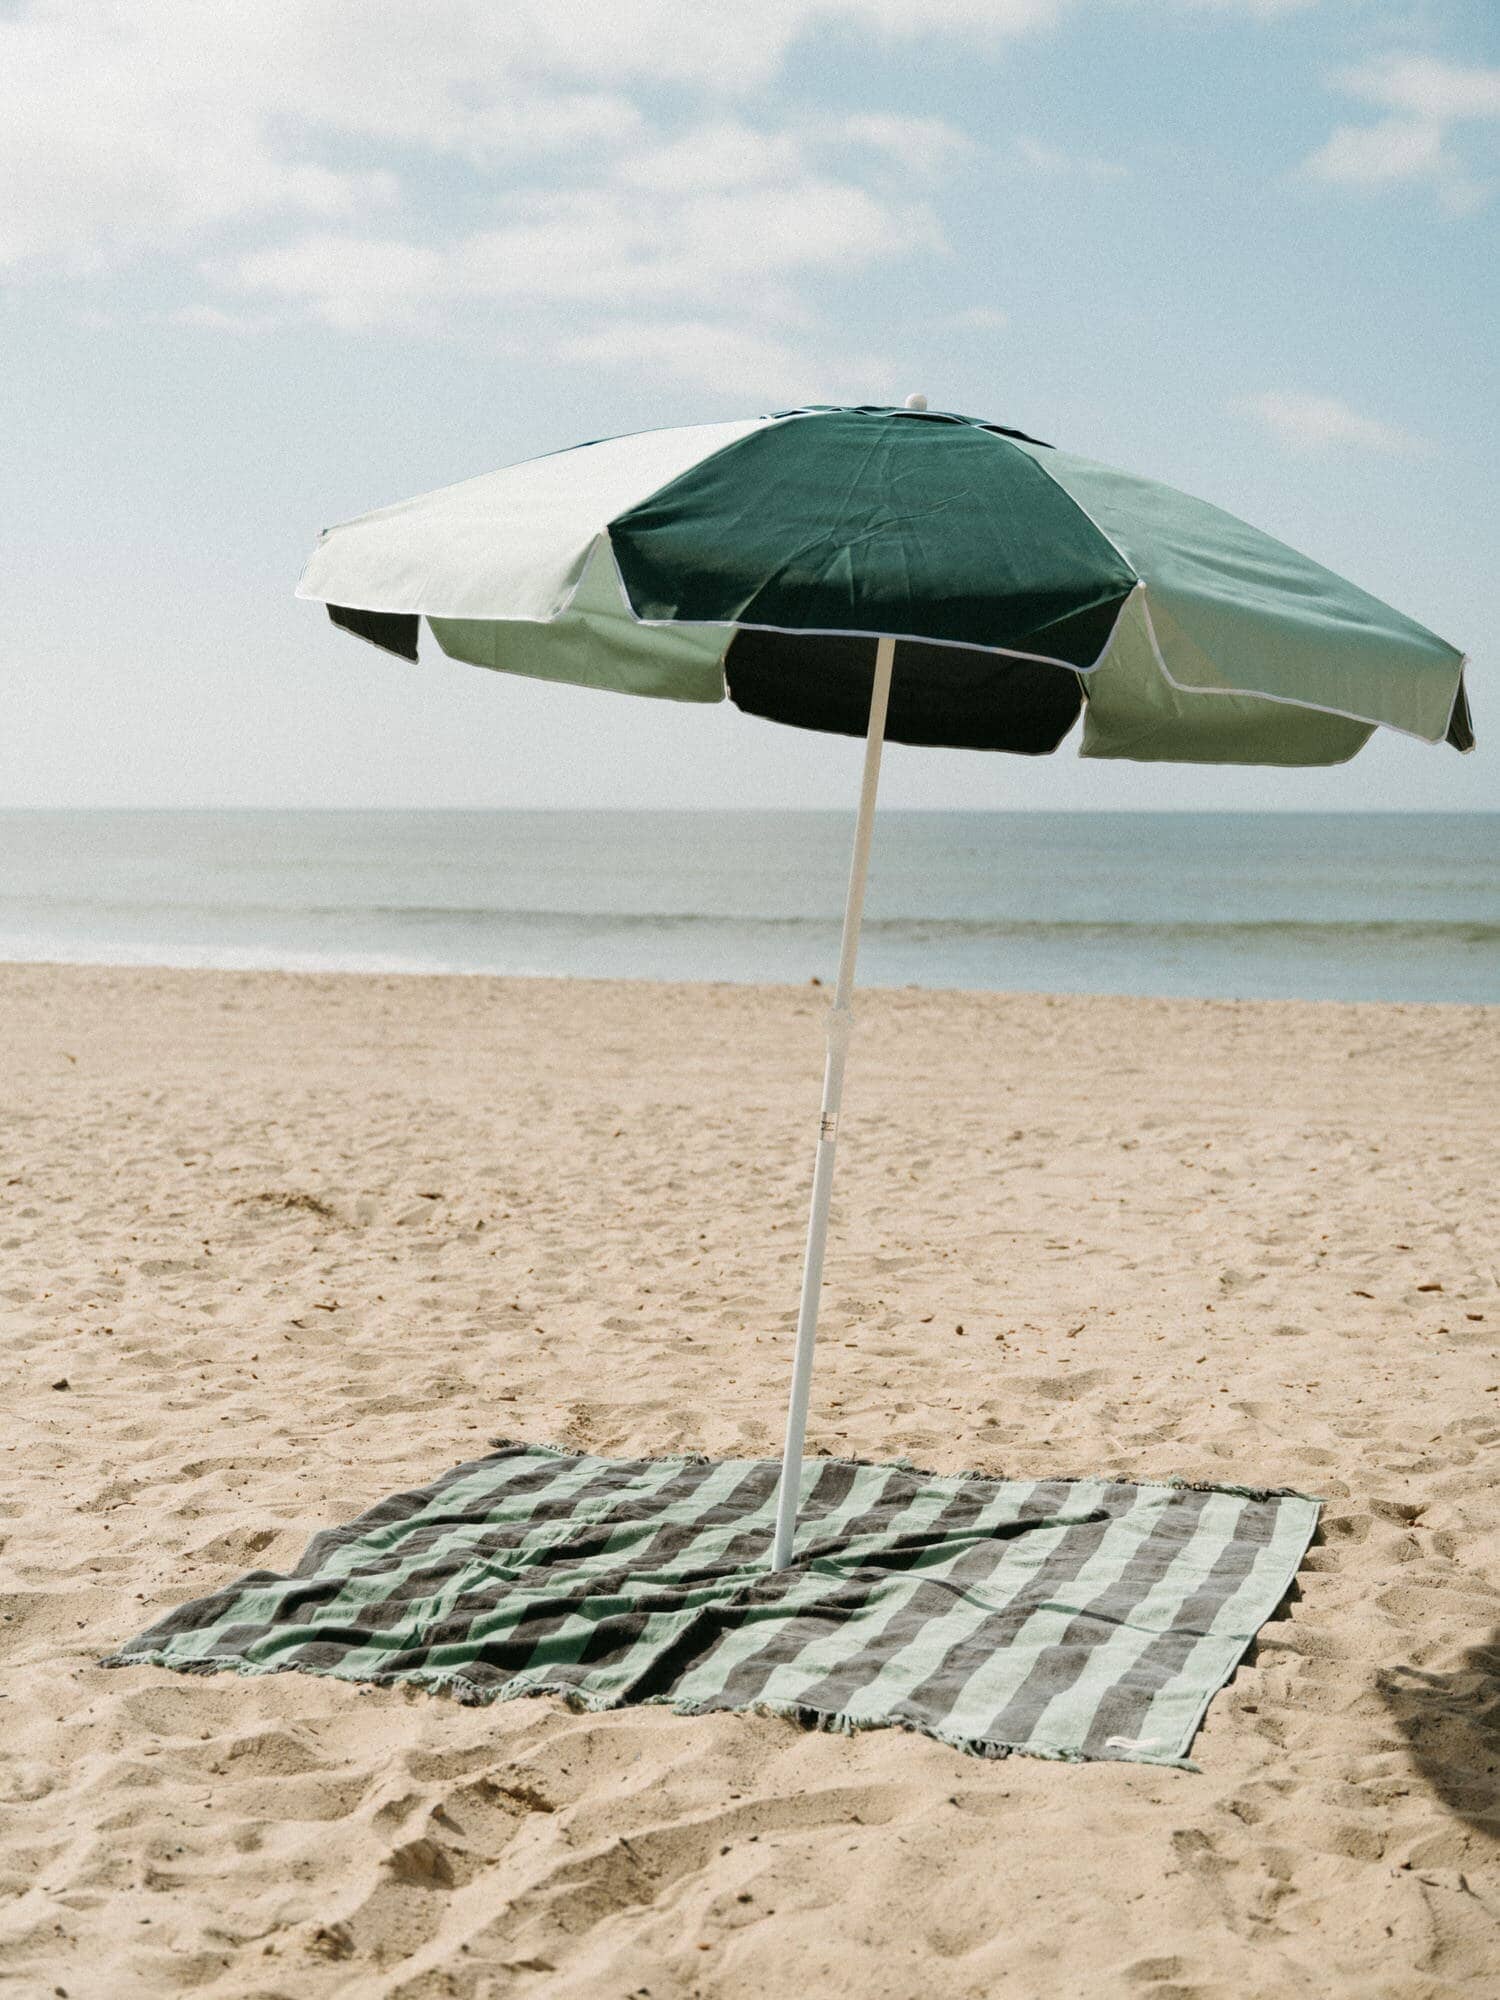 &0s panel green blanket with umbrella on the beach